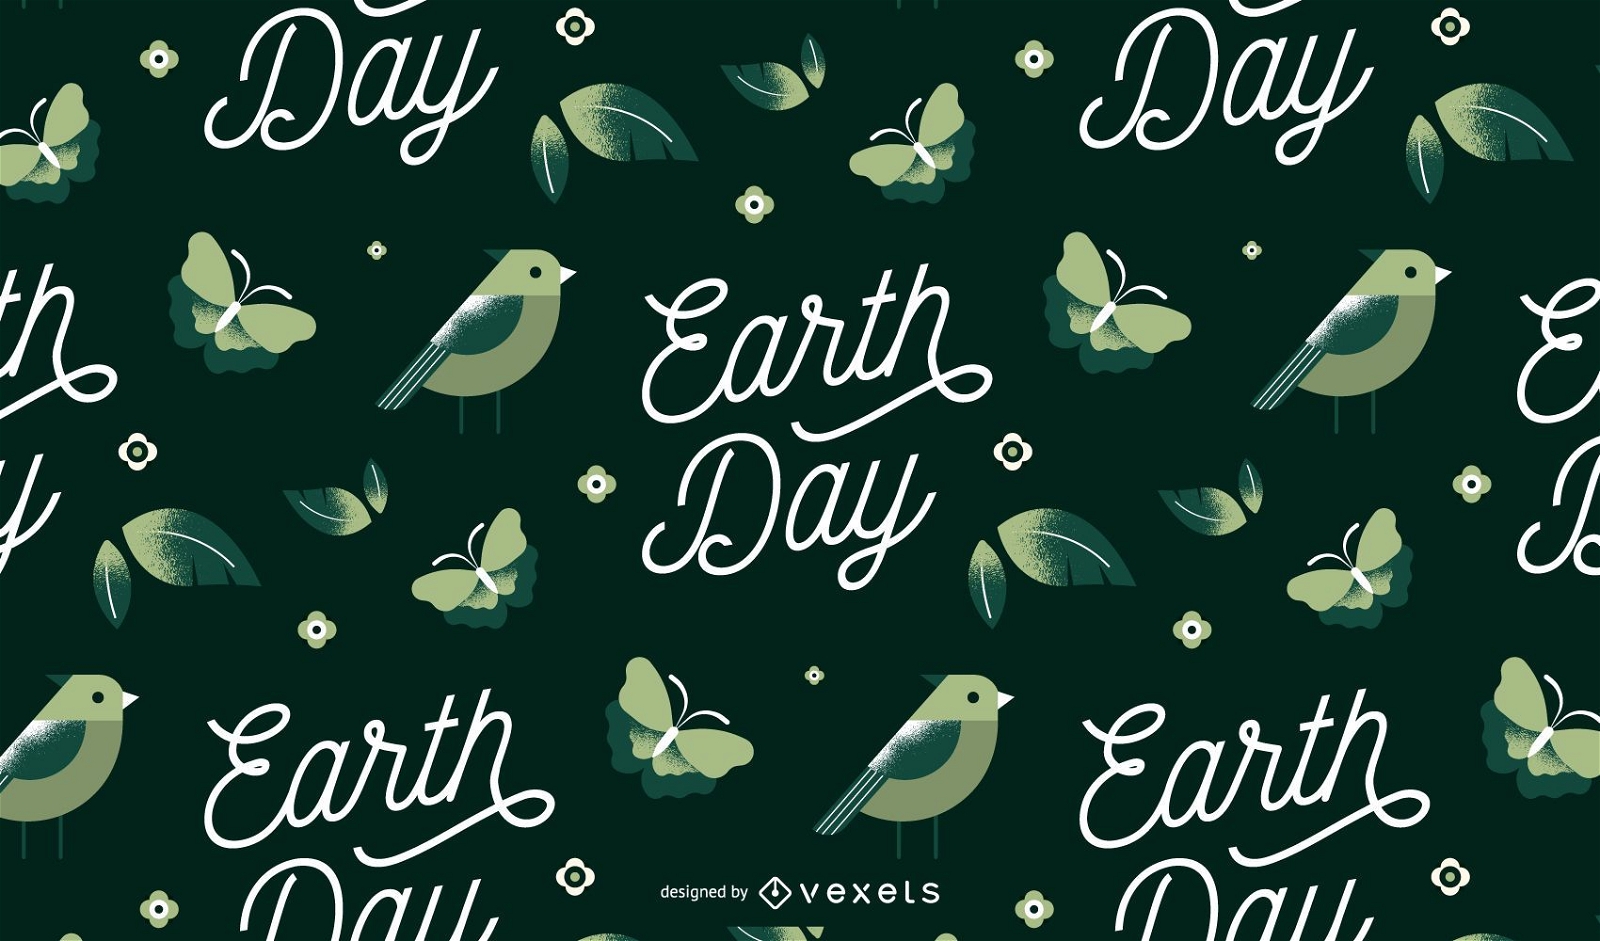 Earth day pattern design